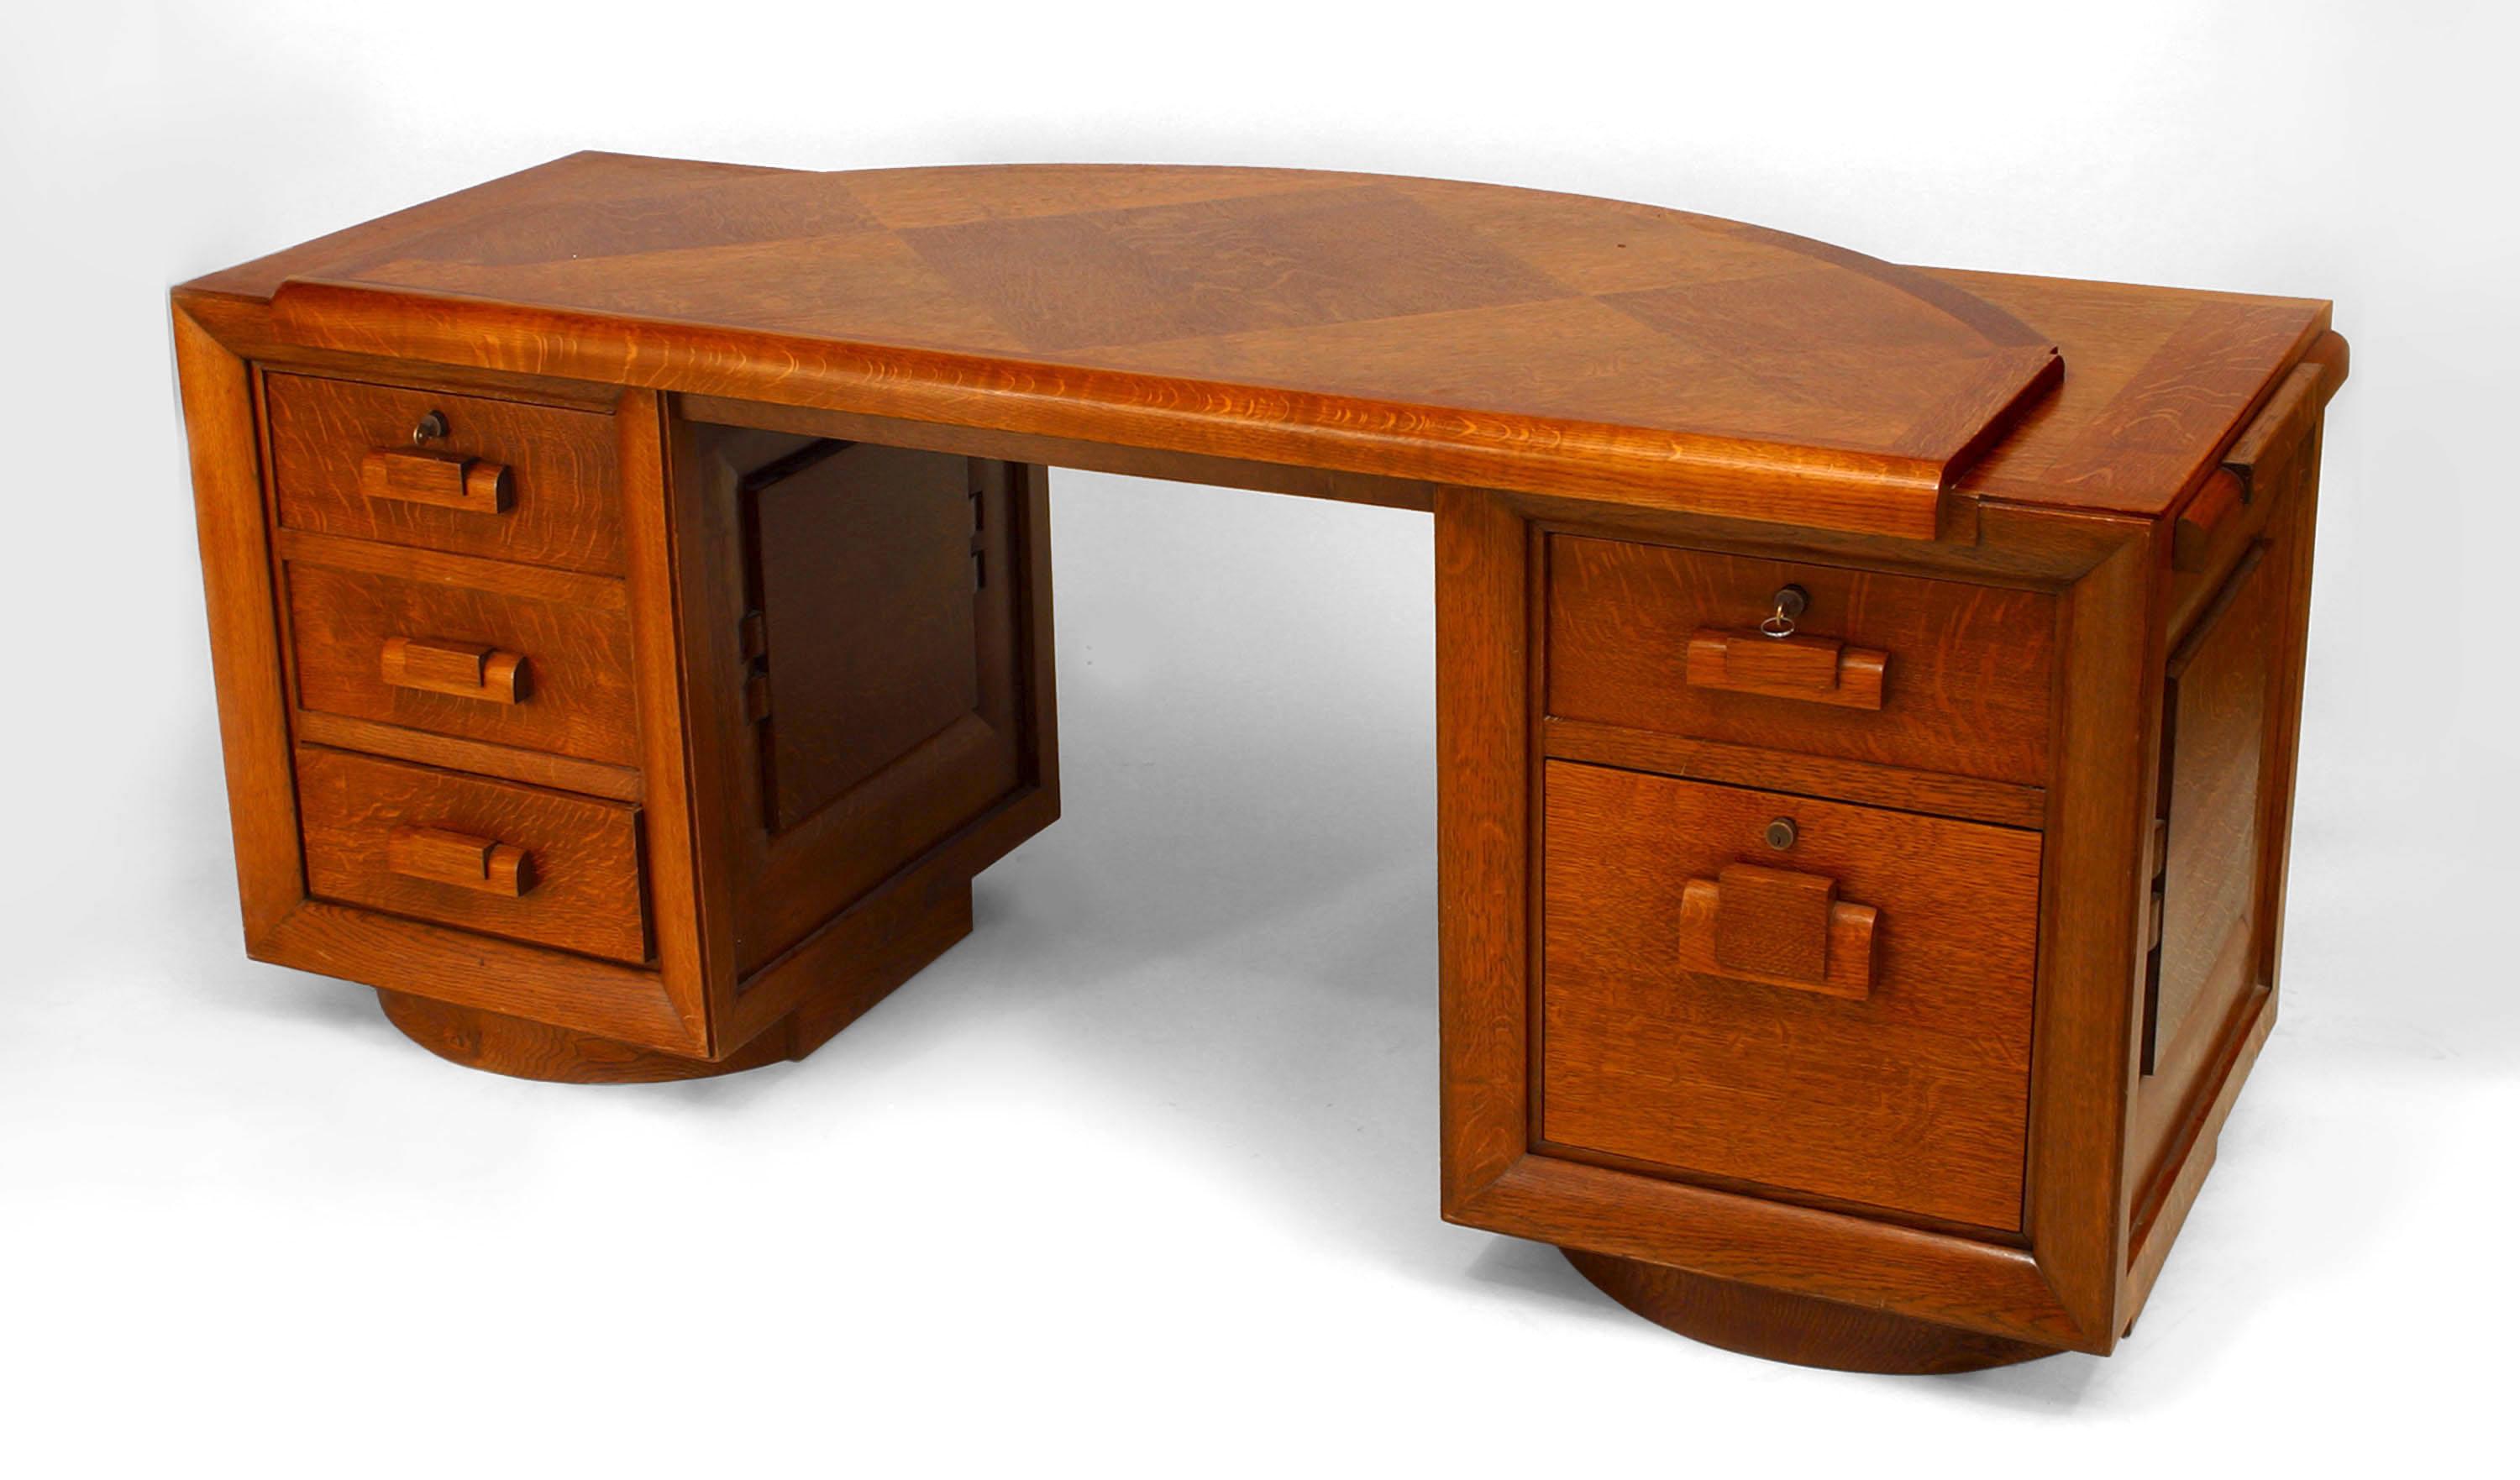 French 1940s oak double pedestal base desk with front panels and a raised ¬Ω round inset top with a parquetry design & sliding side shelves (signed: C. DUDOUYT) (Related Item: 060336A).
